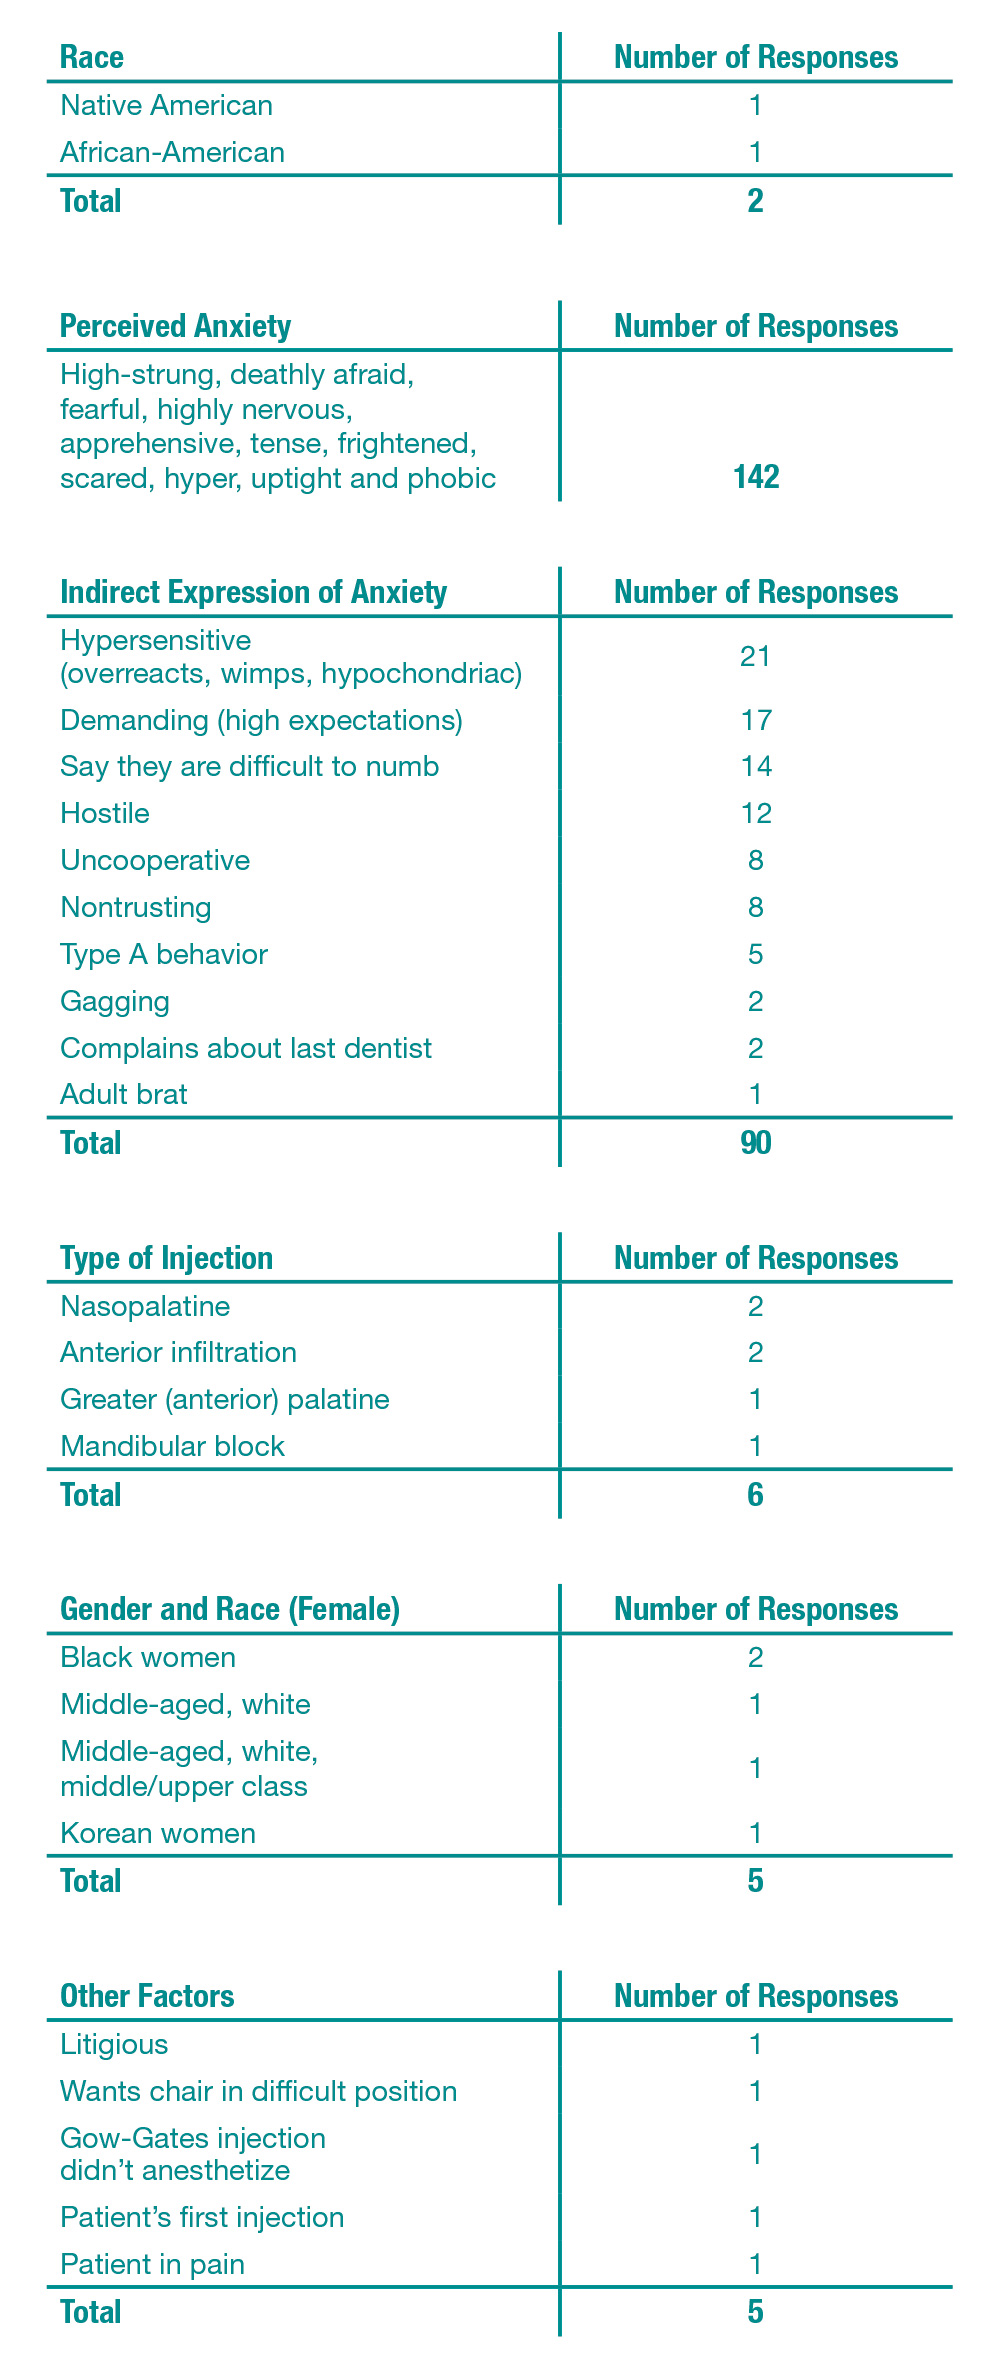 Table 1 Race, Perceived Anxiety, Type of Injection and Other Factors